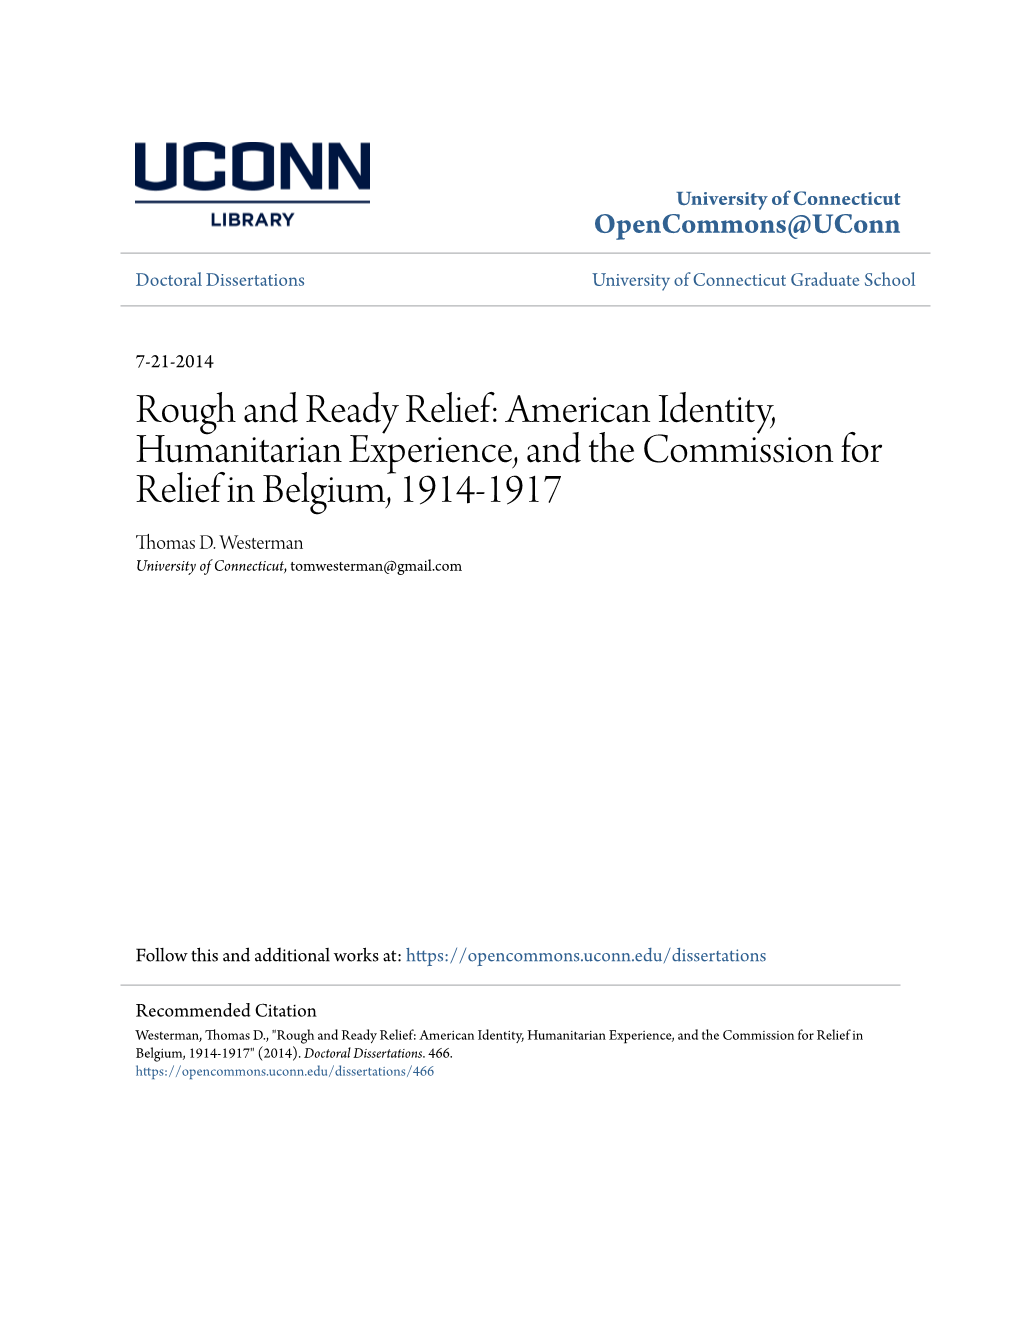 American Identity, Humanitarian Experience, and the Commission for Relief in Belgium, 1914-1917 Thomas D